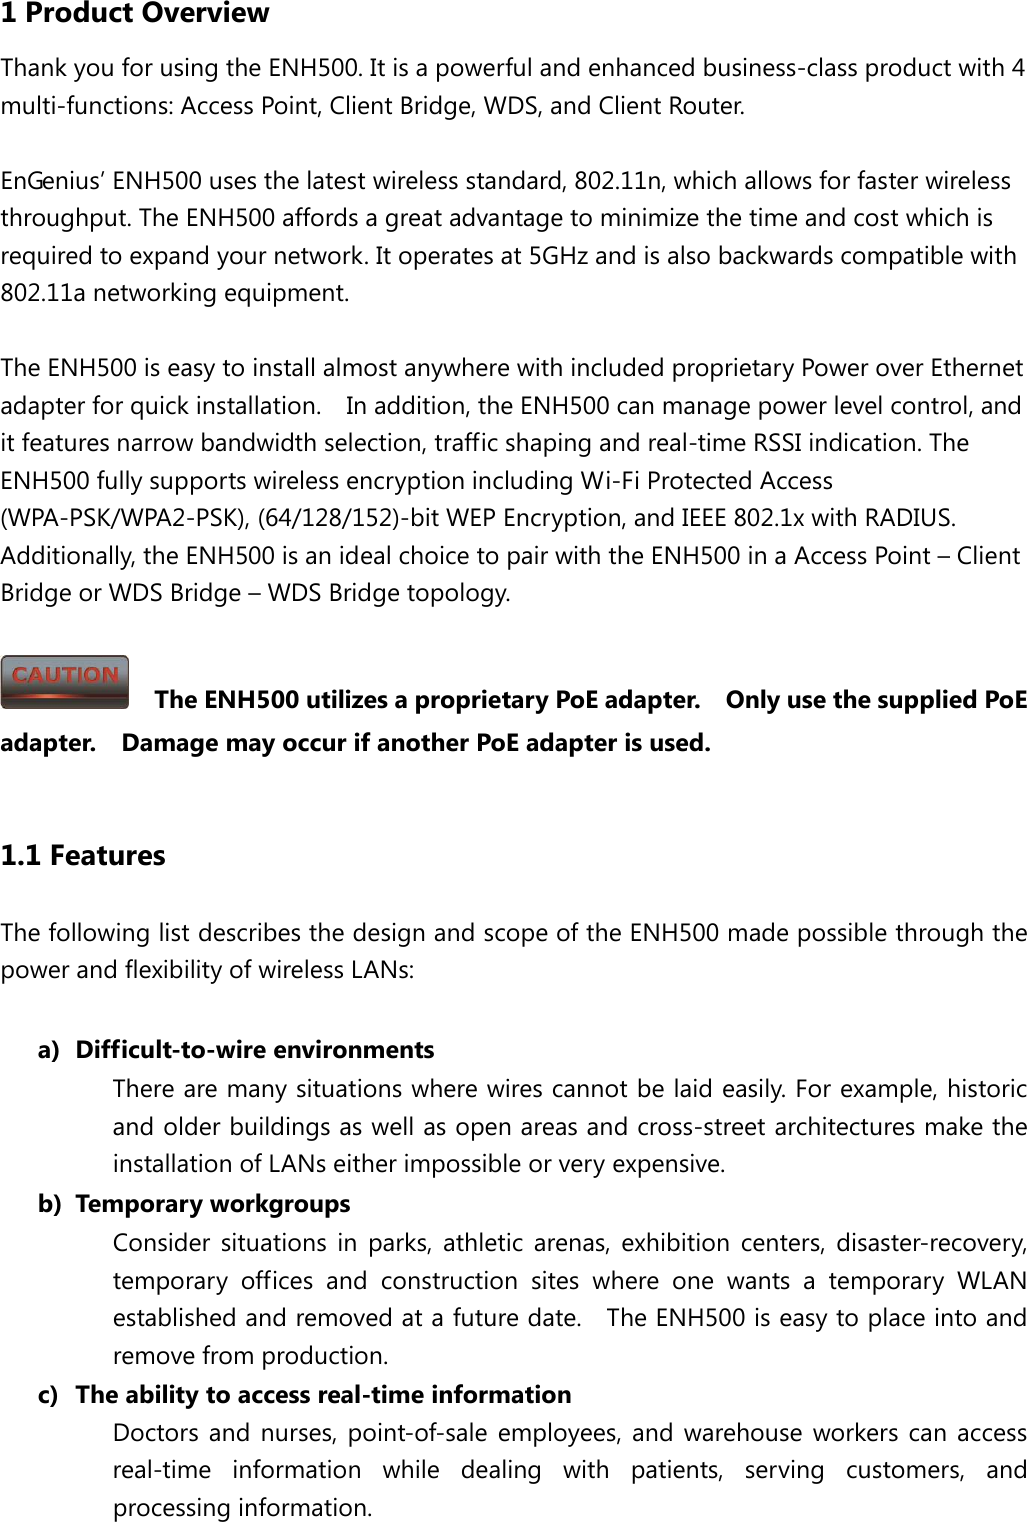 1 Product Overview Thank you for using the ENH500. It is a powerful and enhanced business-class product with 4 multi-functions: Access Point, Client Bridge, WDS, and Client Router.  EnGenius’ ENH500 uses the latest wireless standard, 802.11n, which allows for faster wireless throughput. The ENH500 affords a great advantage to minimize the time and cost which is required to expand your network. It operates at 5GHz and is also backwards compatible with 802.11a networking equipment.  The ENH500 is easy to install almost anywhere with included proprietary Power over Ethernet adapter for quick installation.    In addition, the ENH500 can manage power level control, and it features narrow bandwidth selection, traffic shaping and real-time RSSI indication. The ENH500 fully supports wireless encryption including Wi-Fi Protected Access (WPA-PSK/WPA2-PSK), (64/128/152)-bit WEP Encryption, and IEEE 802.1x with RADIUS.   Additionally, the ENH500 is an ideal choice to pair with the ENH500 in a Access Point – Client Bridge or WDS Bridge – WDS Bridge topology.    The ENH500 utilizes a proprietary PoE adapter.    Only use the supplied PoE adapter.    Damage may occur if another PoE adapter is used.  1.1 Features The following list describes the design and scope of the ENH500 made possible through the power and flexibility of wireless LANs:  a) Difficult-to-wire environments There are many situations where wires cannot be laid easily. For example, historic and older buildings as well as open areas and cross-street architectures make the installation of LANs either impossible or very expensive. b) Temporary workgroups Consider situations in parks, athletic arenas, exhibition centers, disaster-recovery, temporary offices and construction sites where one wants a temporary WLAN established and removed at a future date.    The ENH500 is easy to place into and remove from production. c) The ability to access real-time information Doctors and nurses, point-of-sale employees, and warehouse workers can access real-time information while dealing with patients, serving customers, and processing information. 